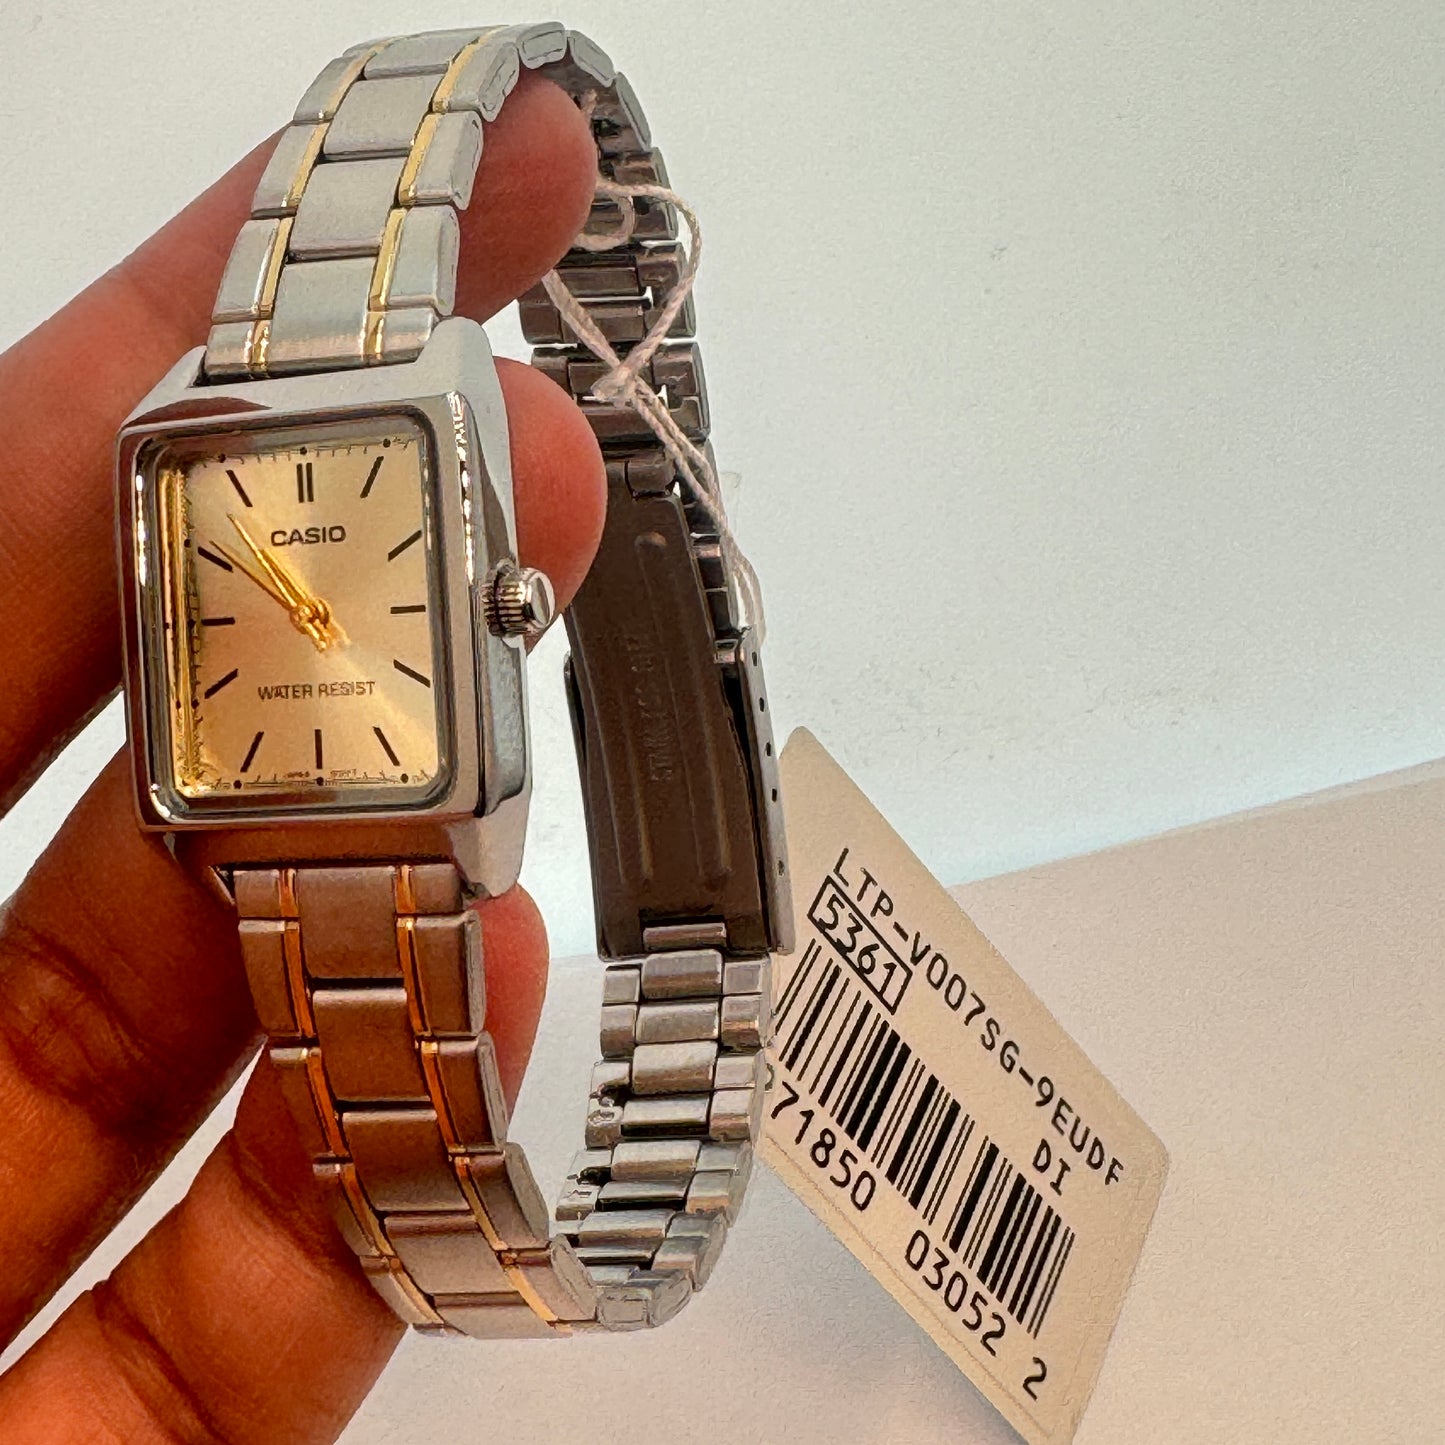 Ladies Casio Watch Adult /Ladies or  for Young Teen Bracelet Watch too 
extra small size 
Fancy  Band New Watch 

Stainless Steel 
New Battery Installed Inside 
Band Length is aroud 7 inches Long

30 mm Diameter Extra Small